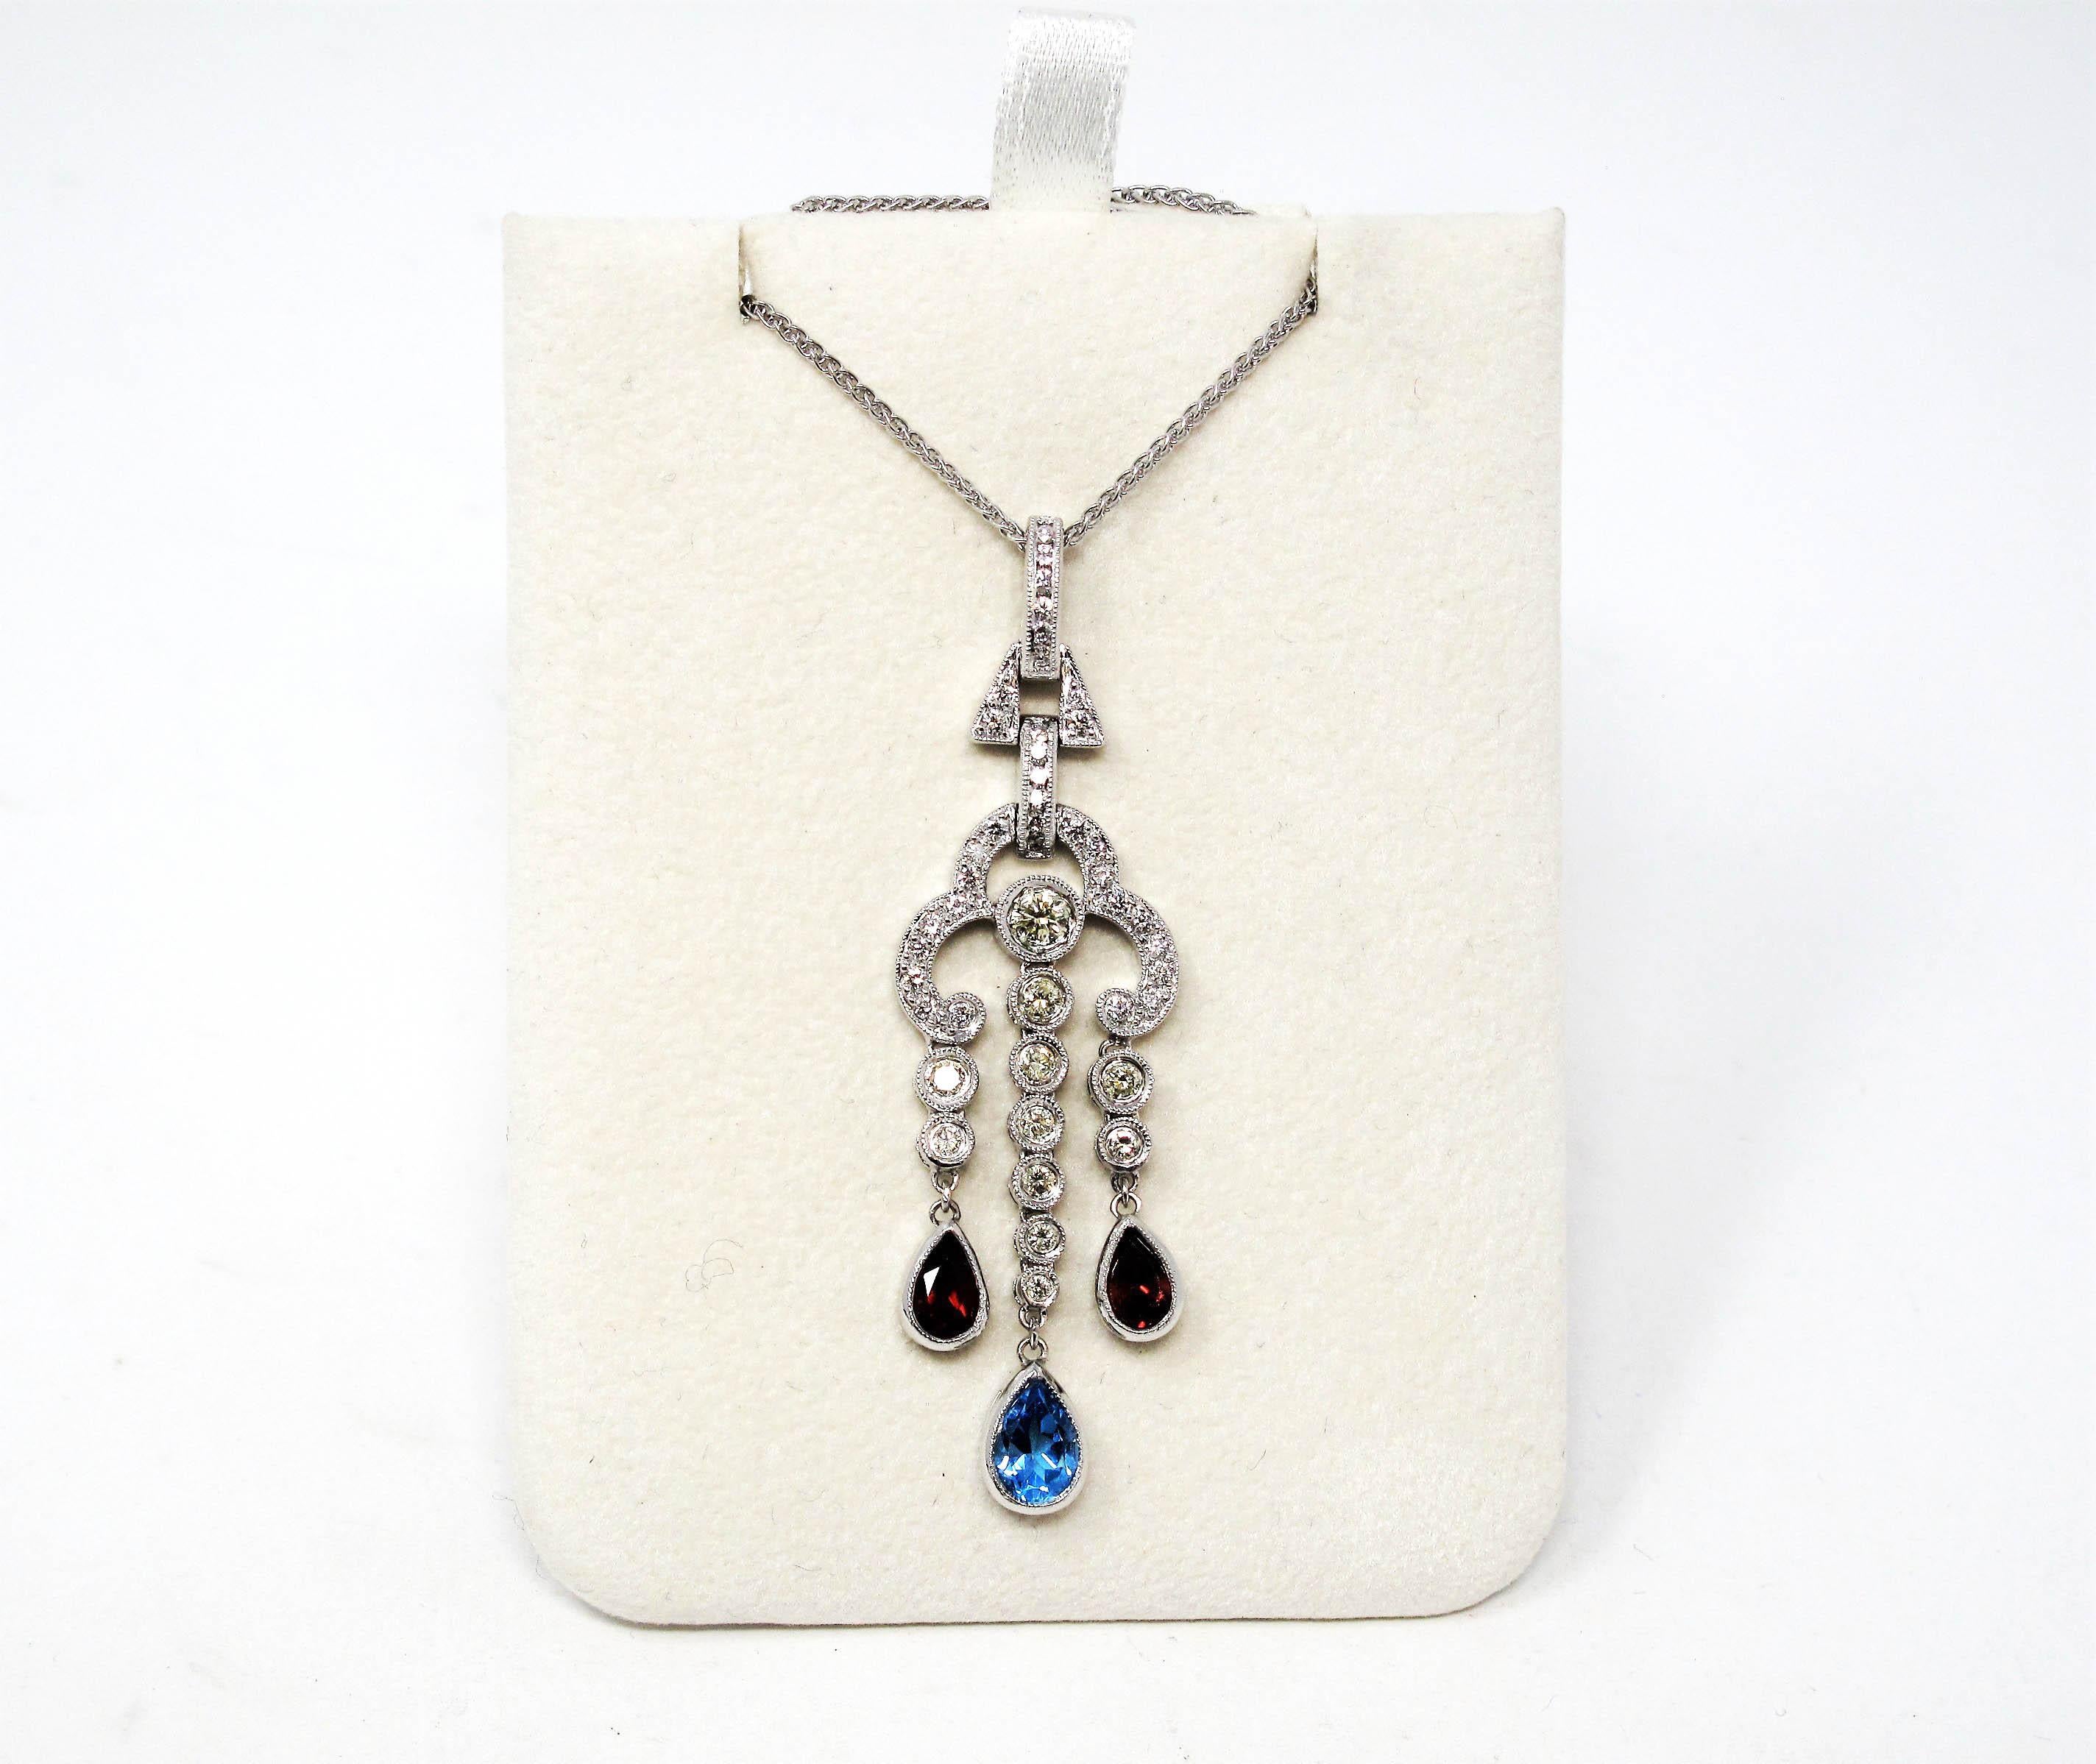 Exquisite vintage style chandelier pendant necklace featuring natural diamonds, blue topaz and Pyrope garnets. This stunningly sparkly piece glitters from every direction while the multi-colored gemstones add a colorful focal point. The dangling